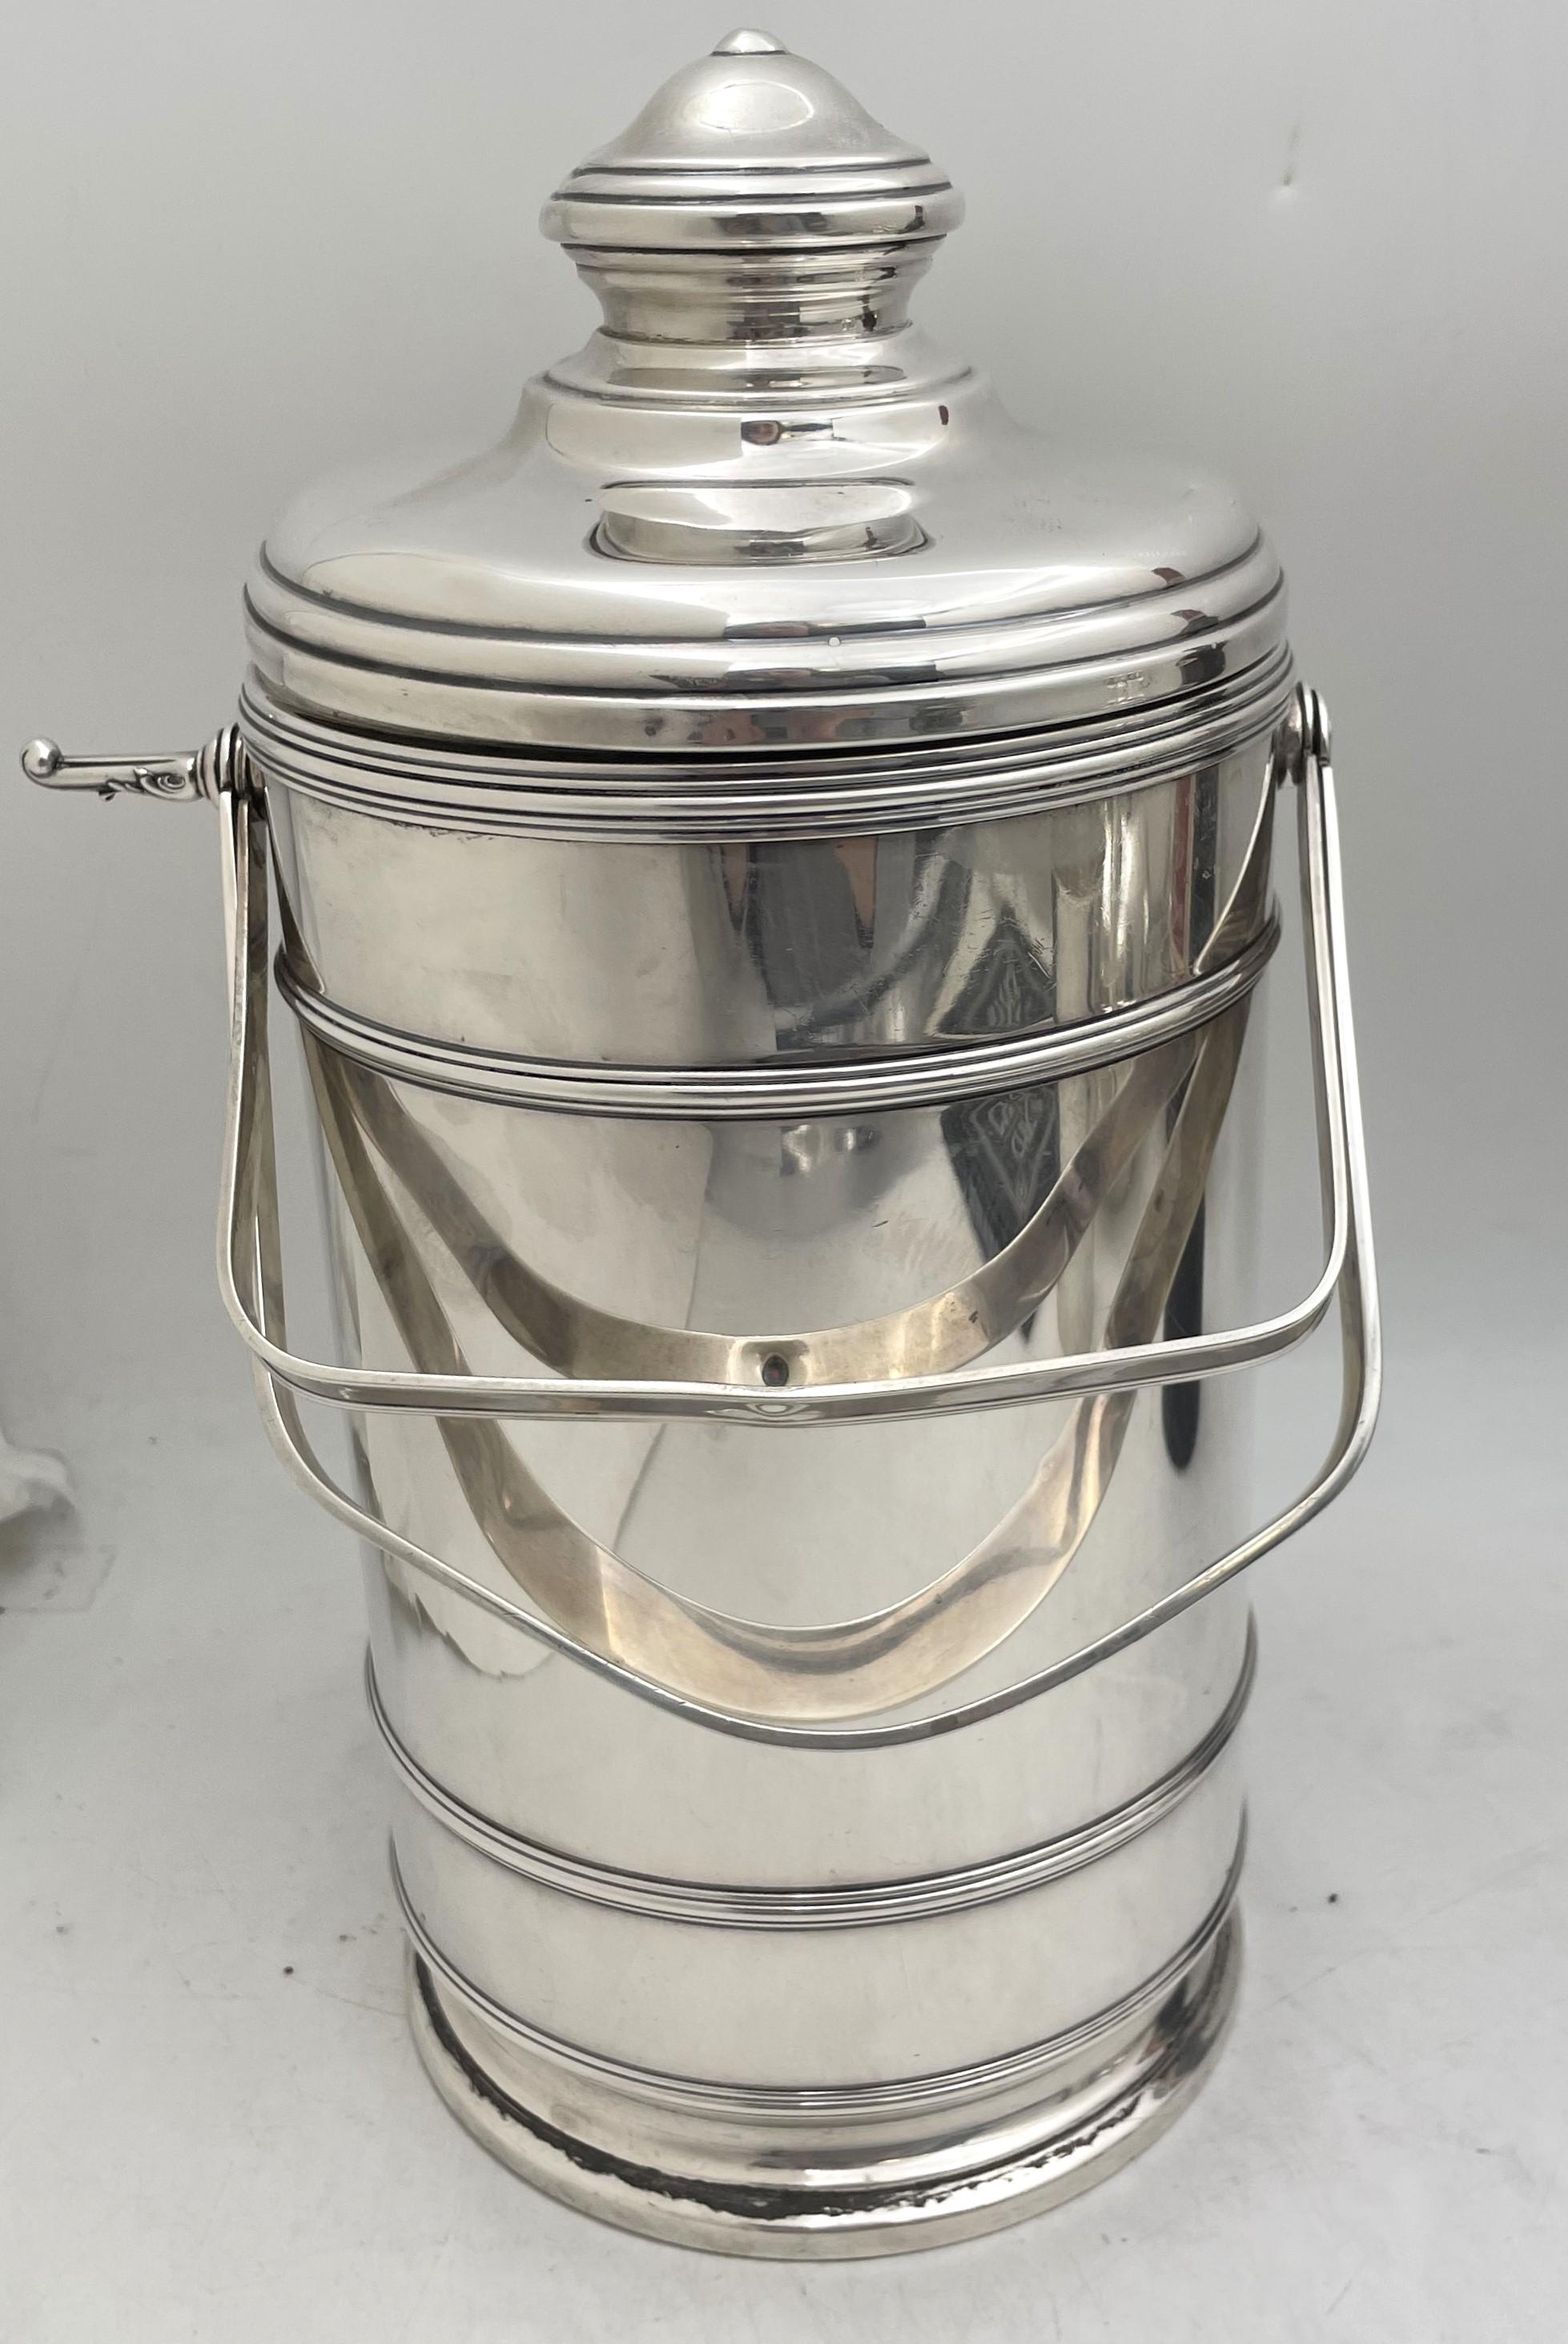 Lebkuecher & Co., possibly made for Tiffany & Co. or Cartier, sterling silver ice bucket in Art Deco style, with an elegant, geometric design, with two handles, lined with a Pyrex Thermos. It measures 12'' in height with the lid (9 1/4'' without) by